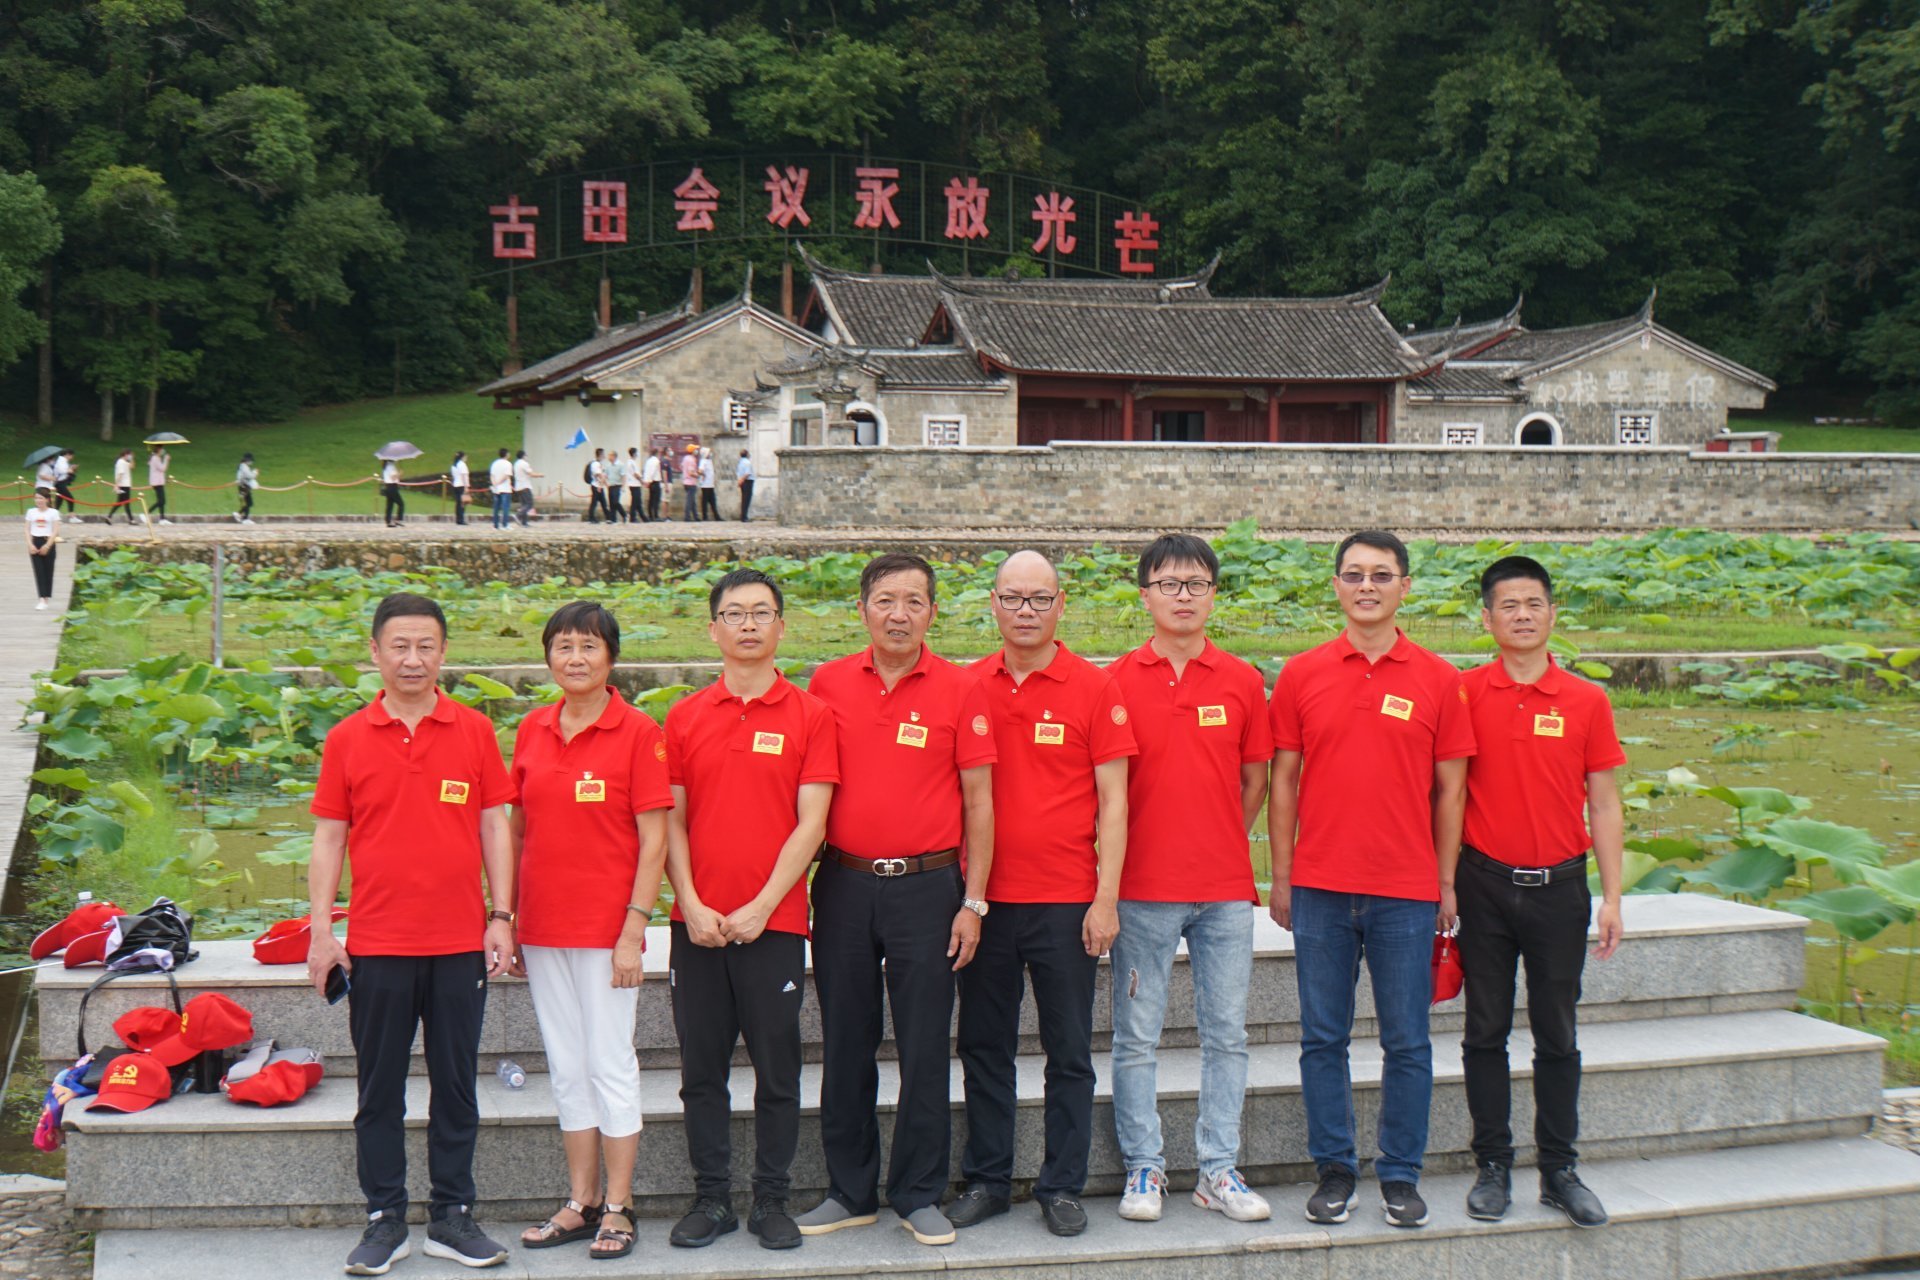 Members of Longhu Township of Jinjiang City organized a red tour to the Gutian Conference to celebrate the 100th anniversary of the founding of the Communist Party of China